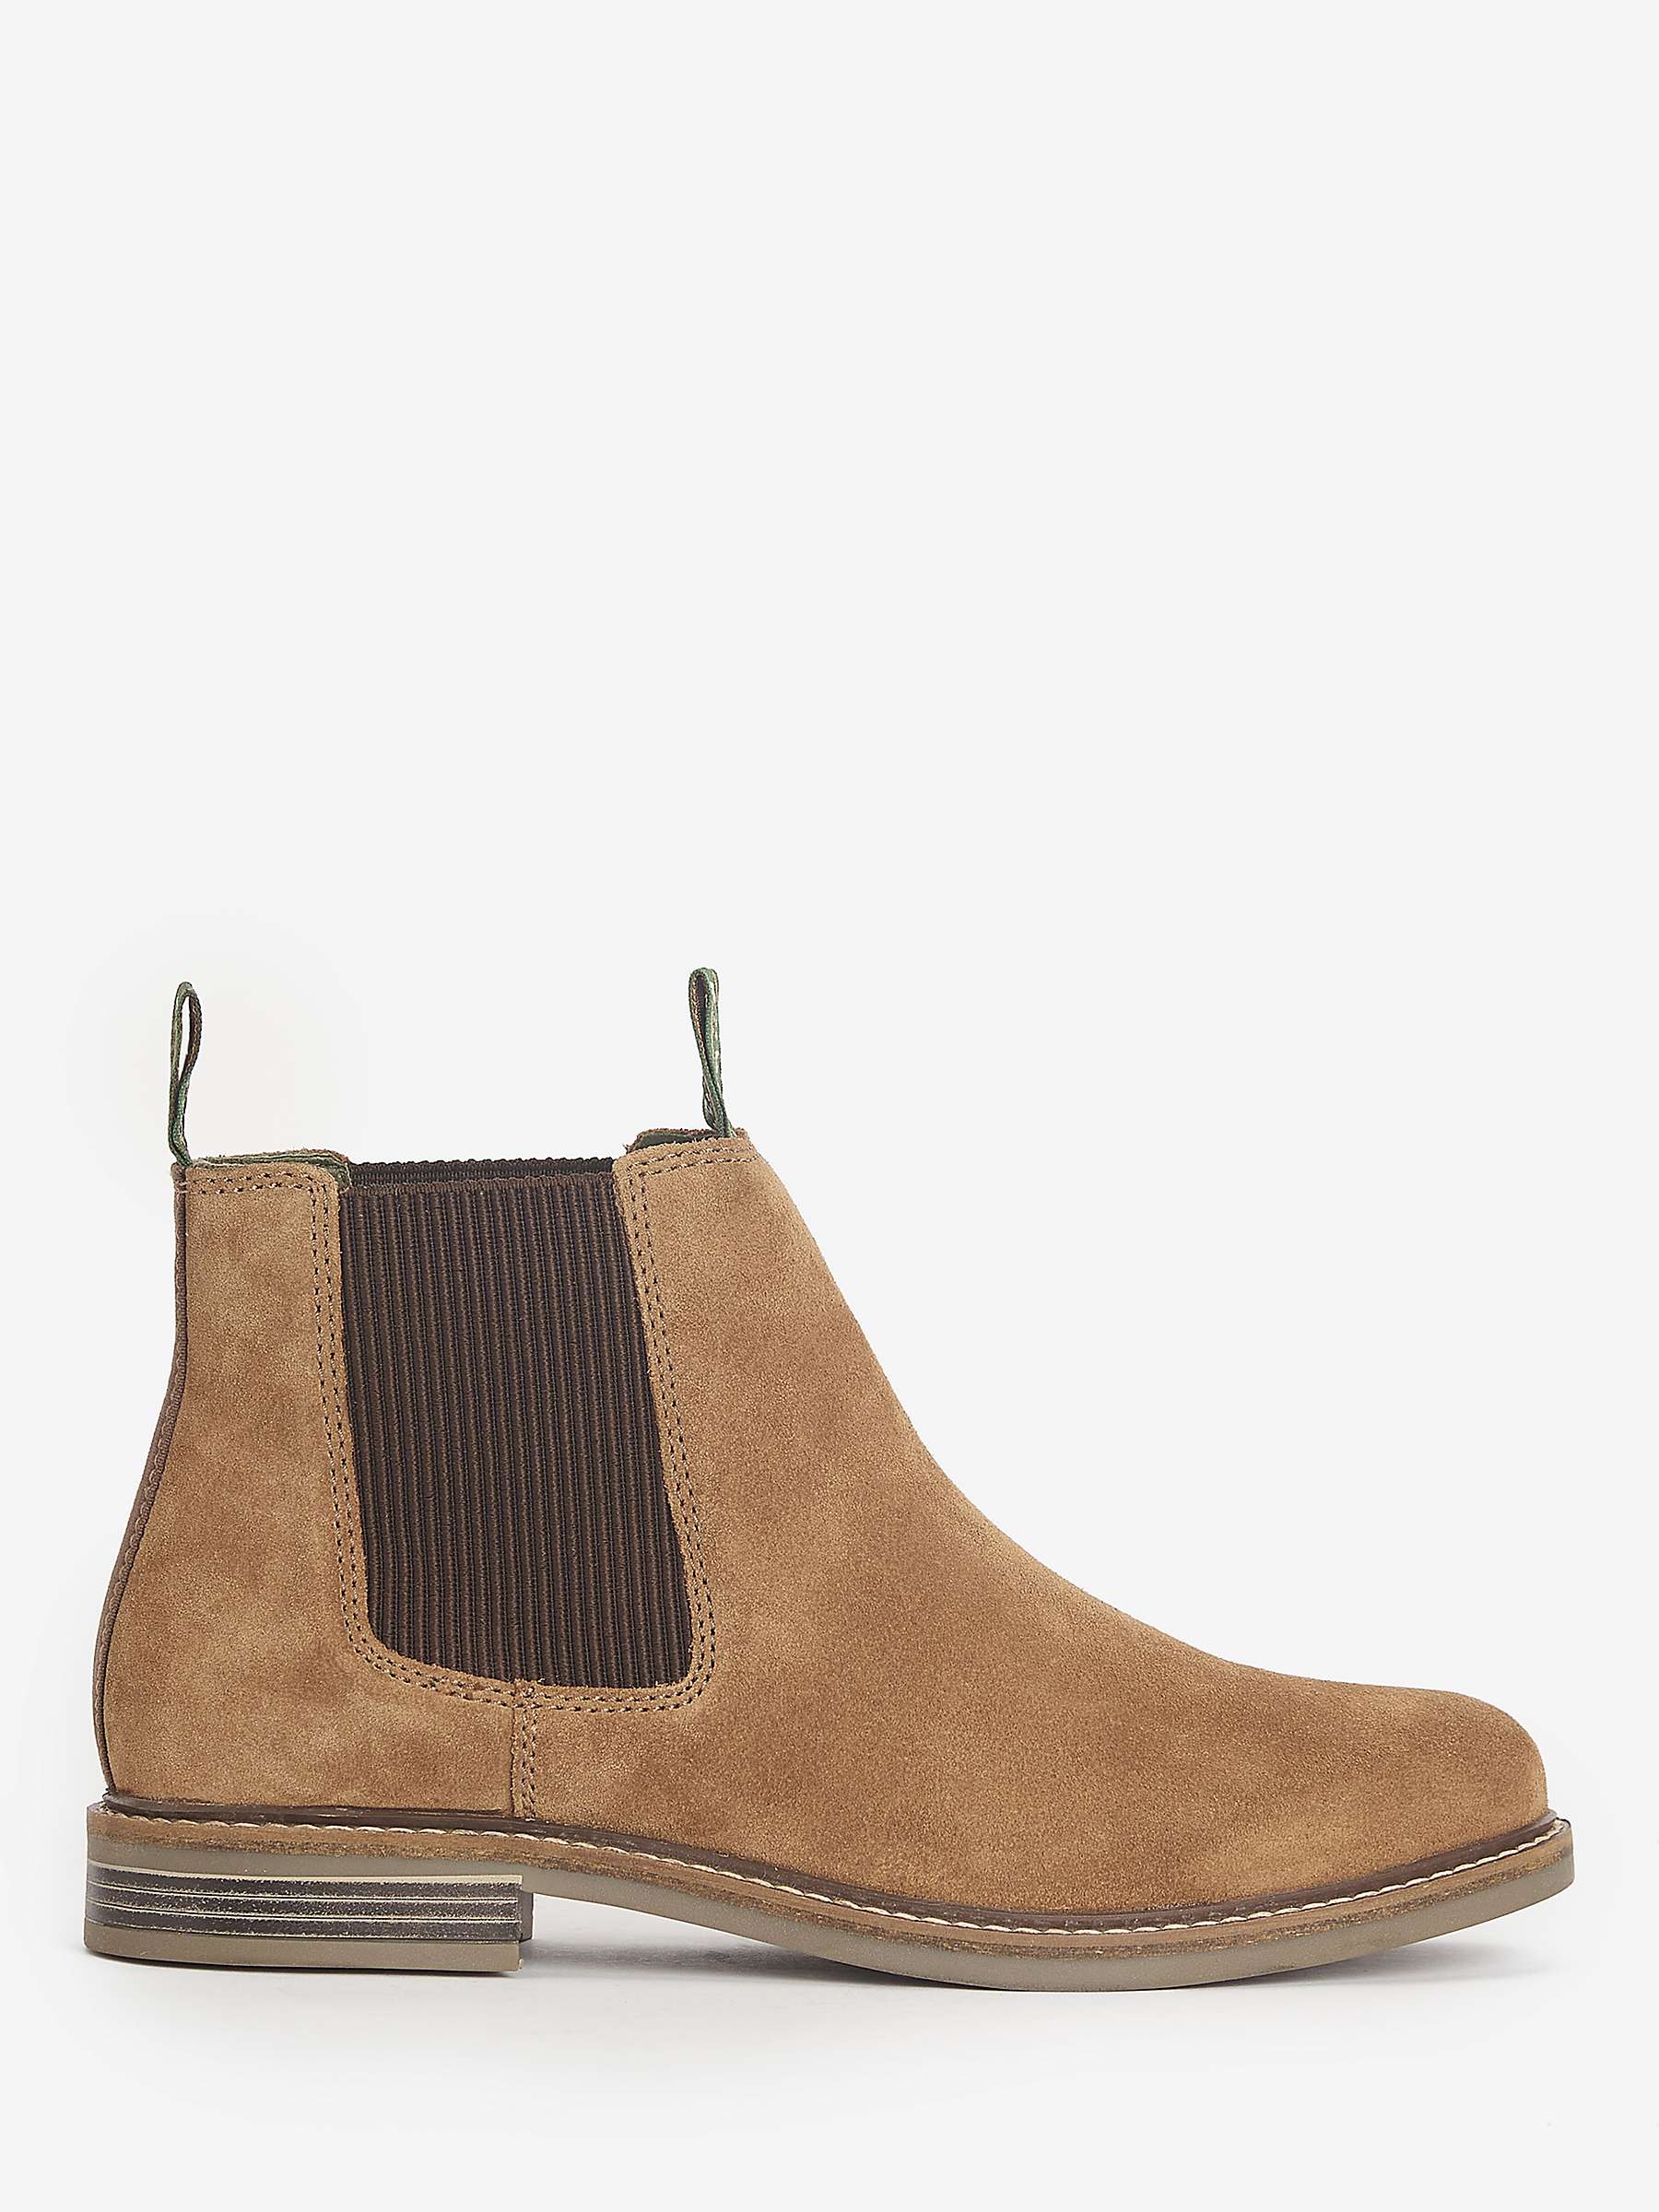 Buy Barbour Farsley Fawn Suede Boots, Brown Online at johnlewis.com